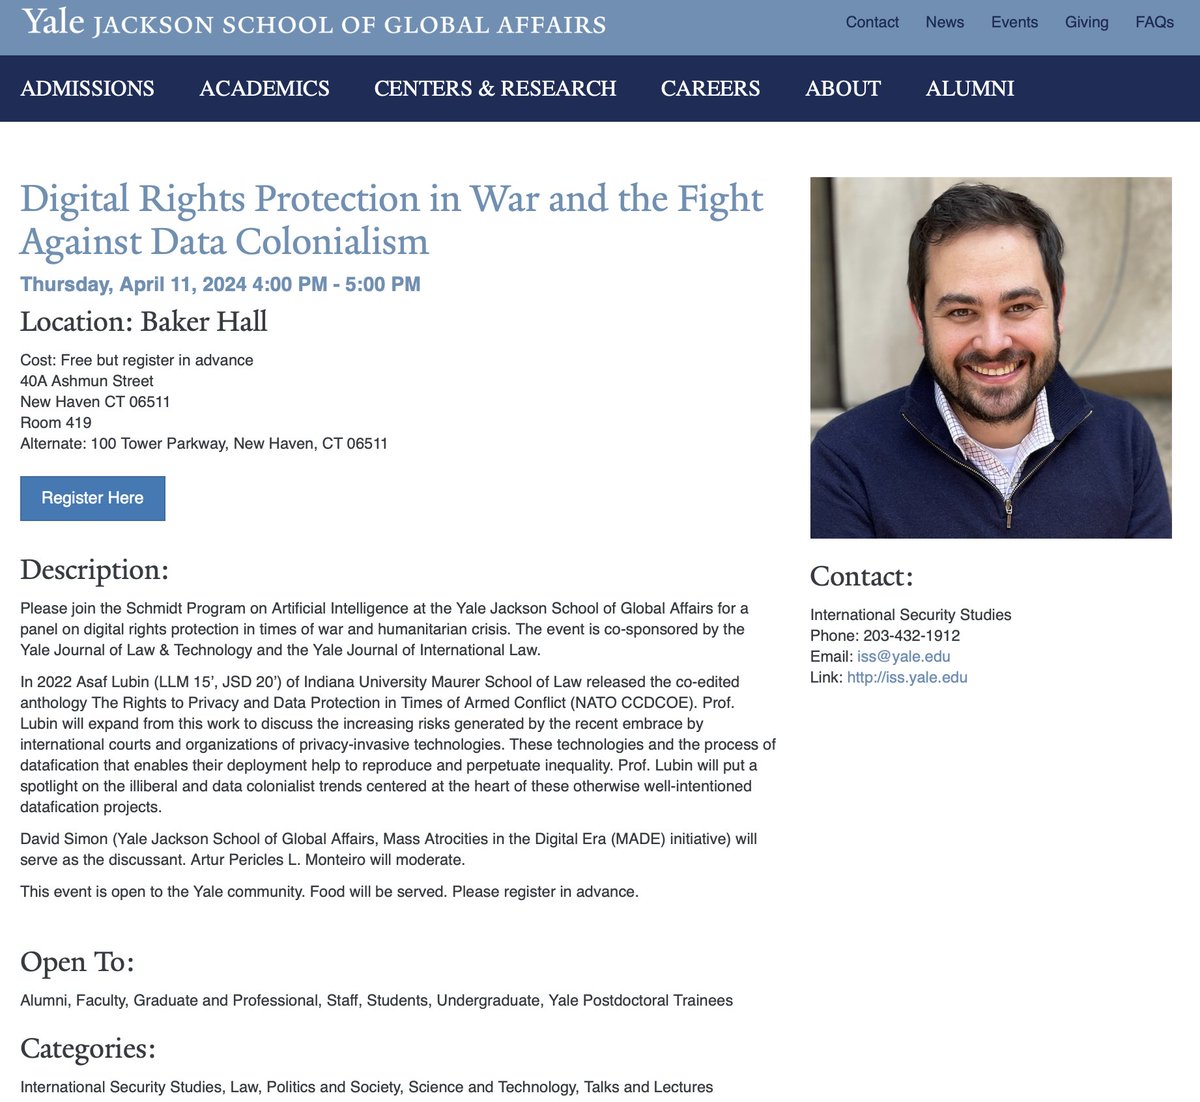 Heading to @YaleLawSch next week (4/11) at the invitation of @JacksonYale @ISSYale @YJoLT @YJILonline. Together with David Simon (Yale PoliSci) I'll discuss work on digital rights protection in war & data colonialism in global justice. For more info: jackson.yale.edu/jackson-events…